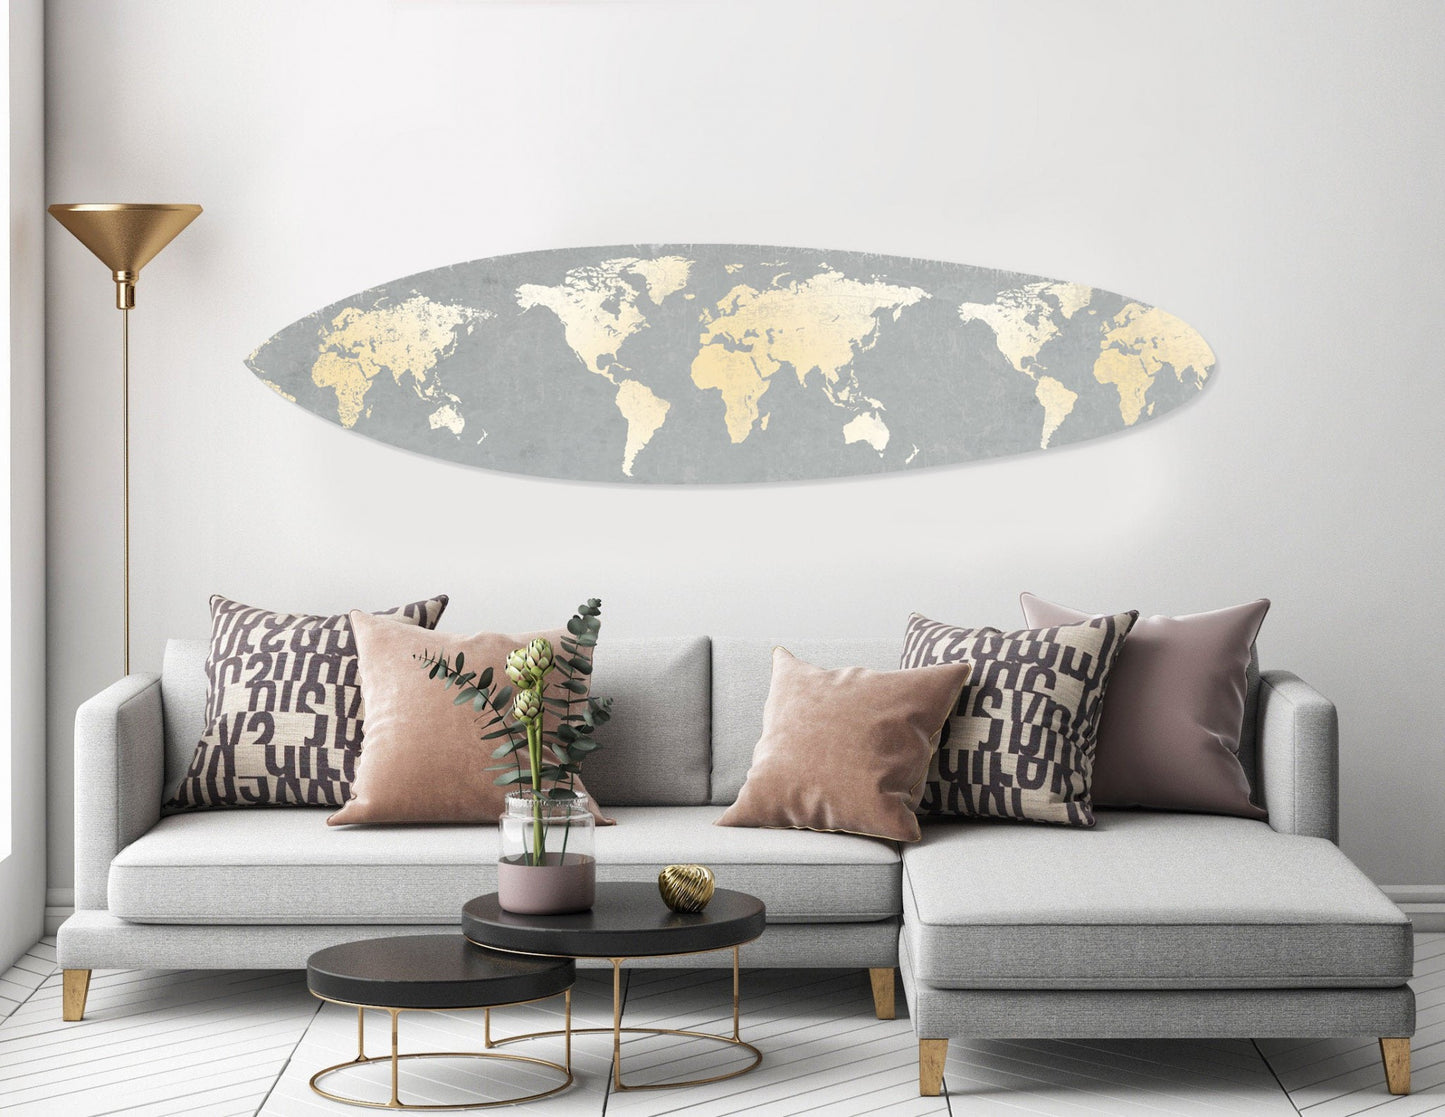 76" X 18" X 1" Grey And Gold World Map Surfboard Wall Art